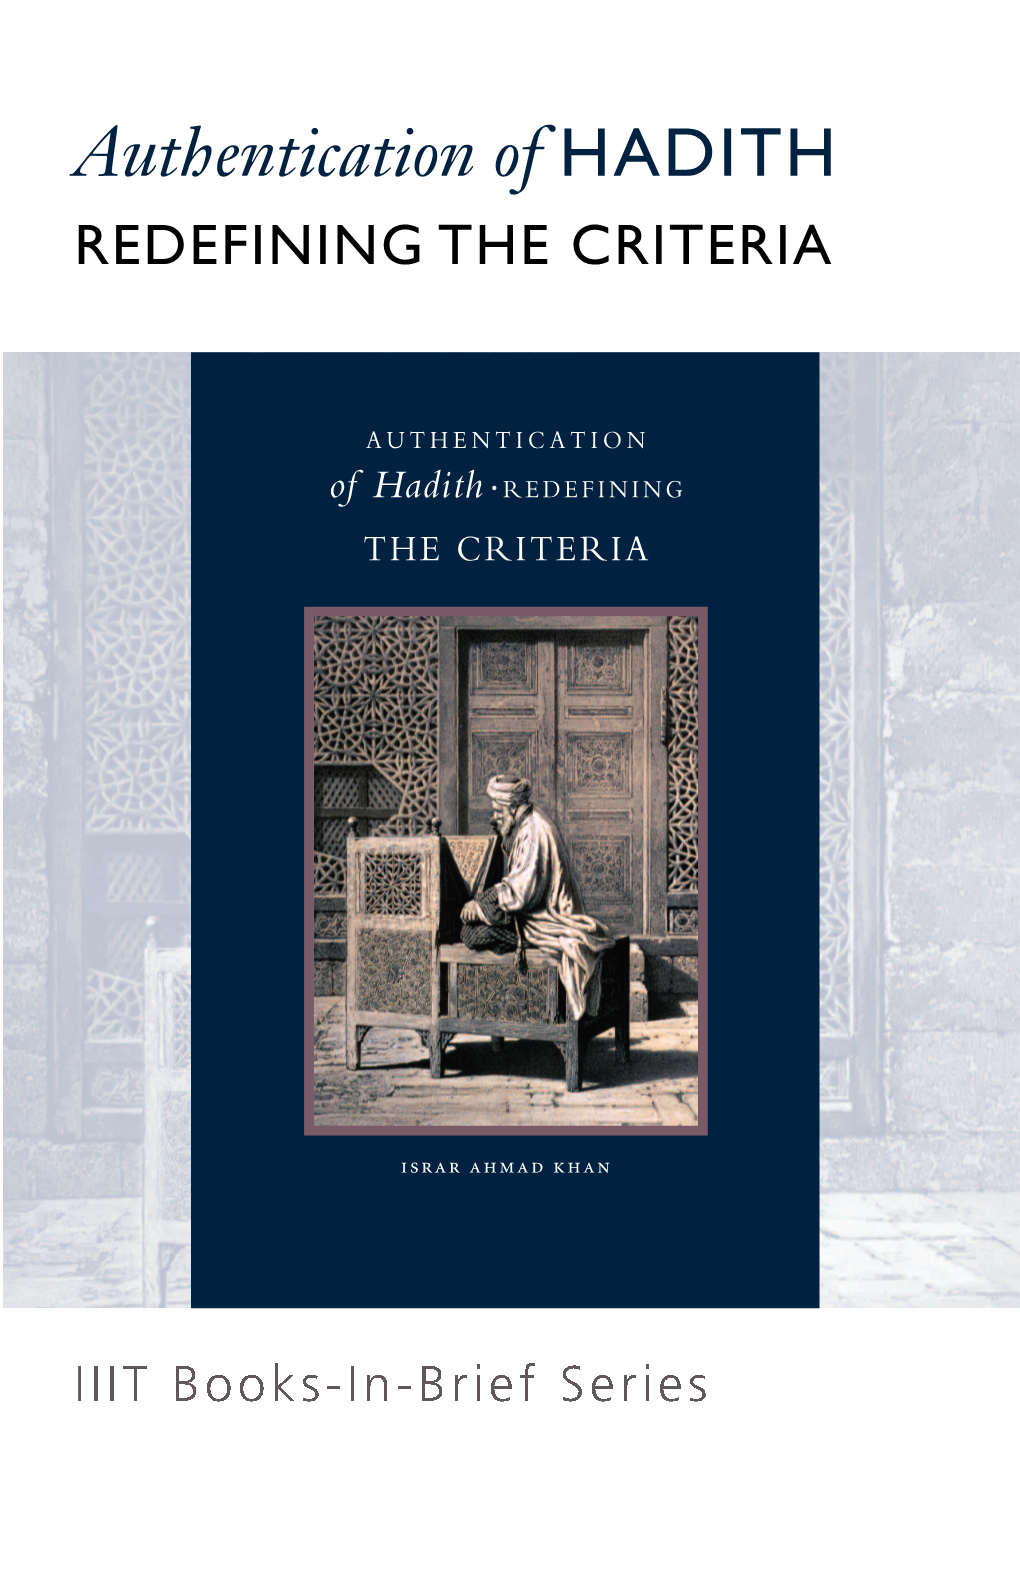 Authentication of Hadith: Redefining the Criteria Was Published in Complete Form in 2010